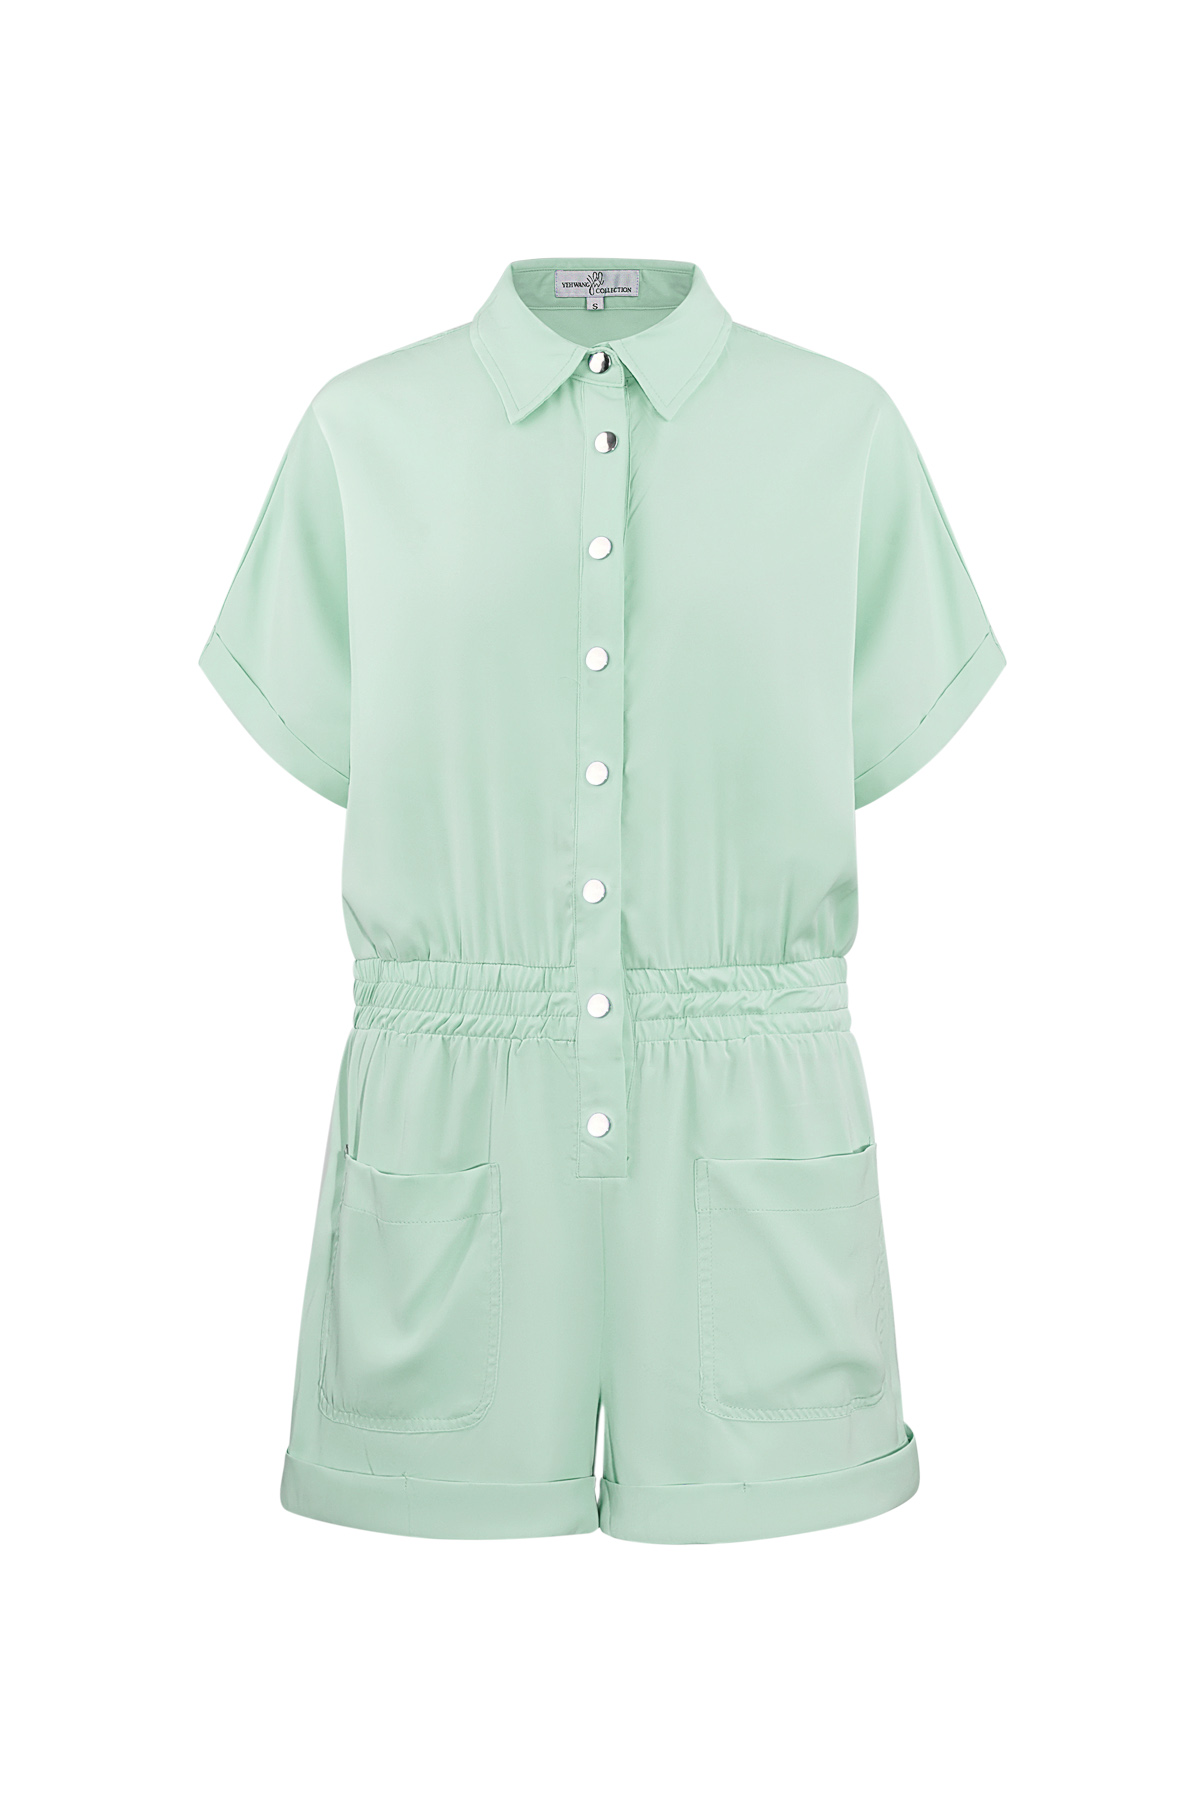 Colorful playsuit - green